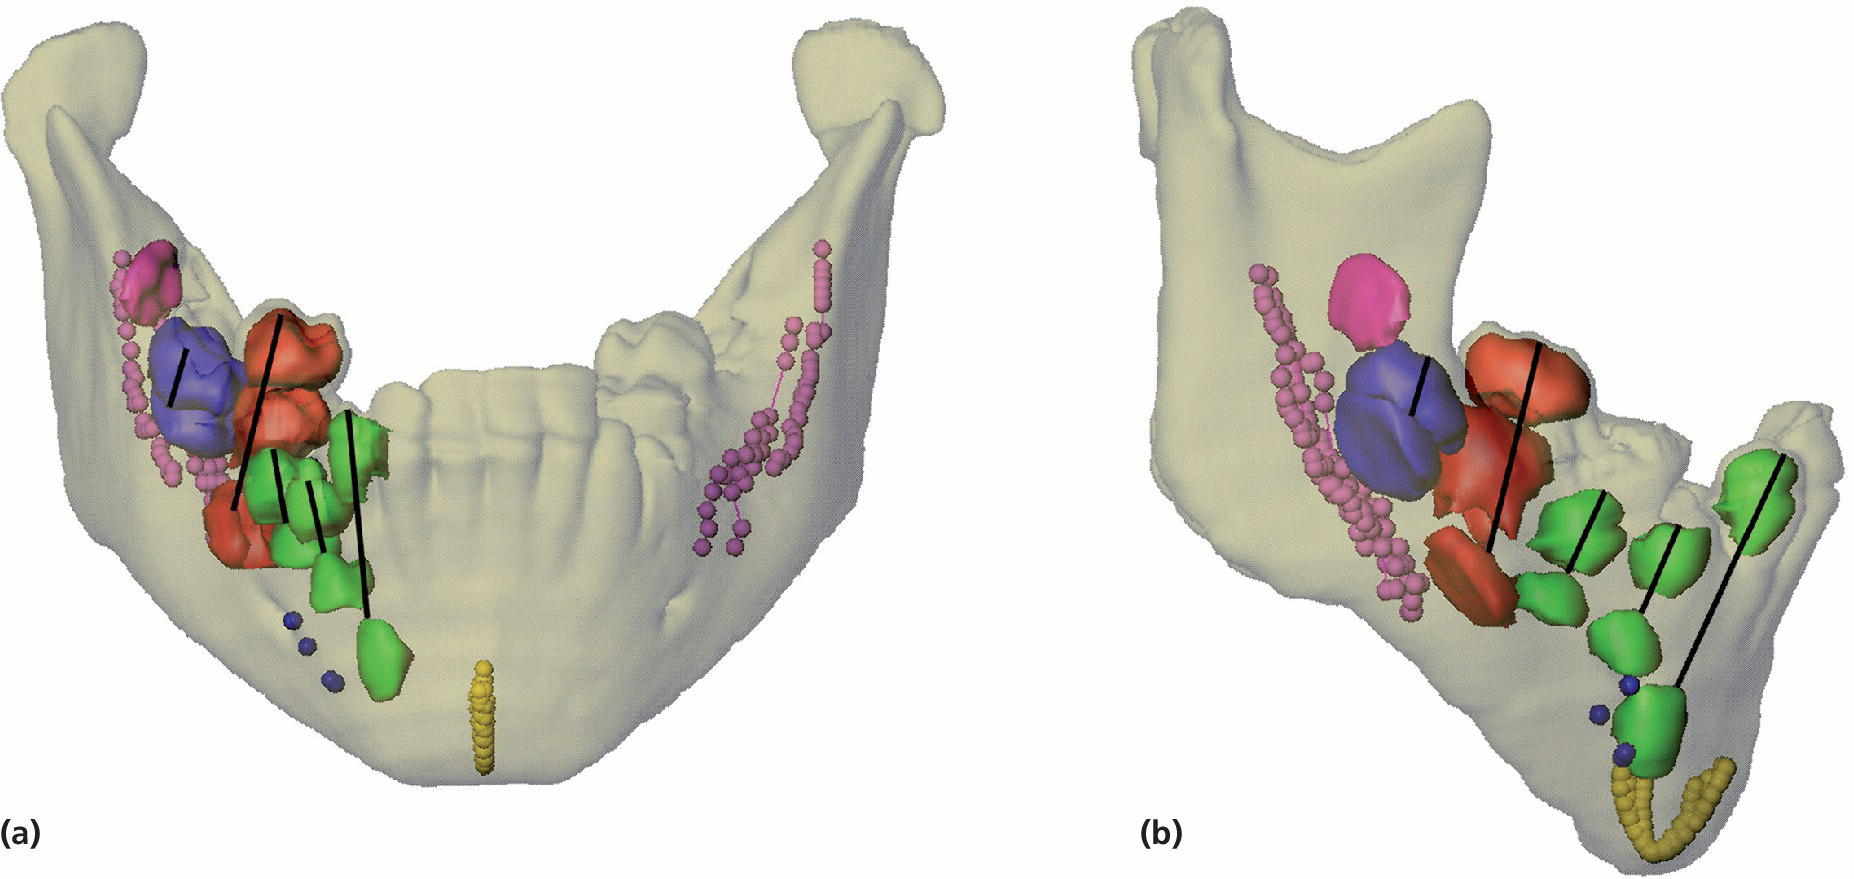 Frontal (a) and lateral views (b) of the transparent mandible, displaying symphysis menti, mental foramen, mandibular canals, and teeth in discrete colors, with lines indicating the eruption paths.